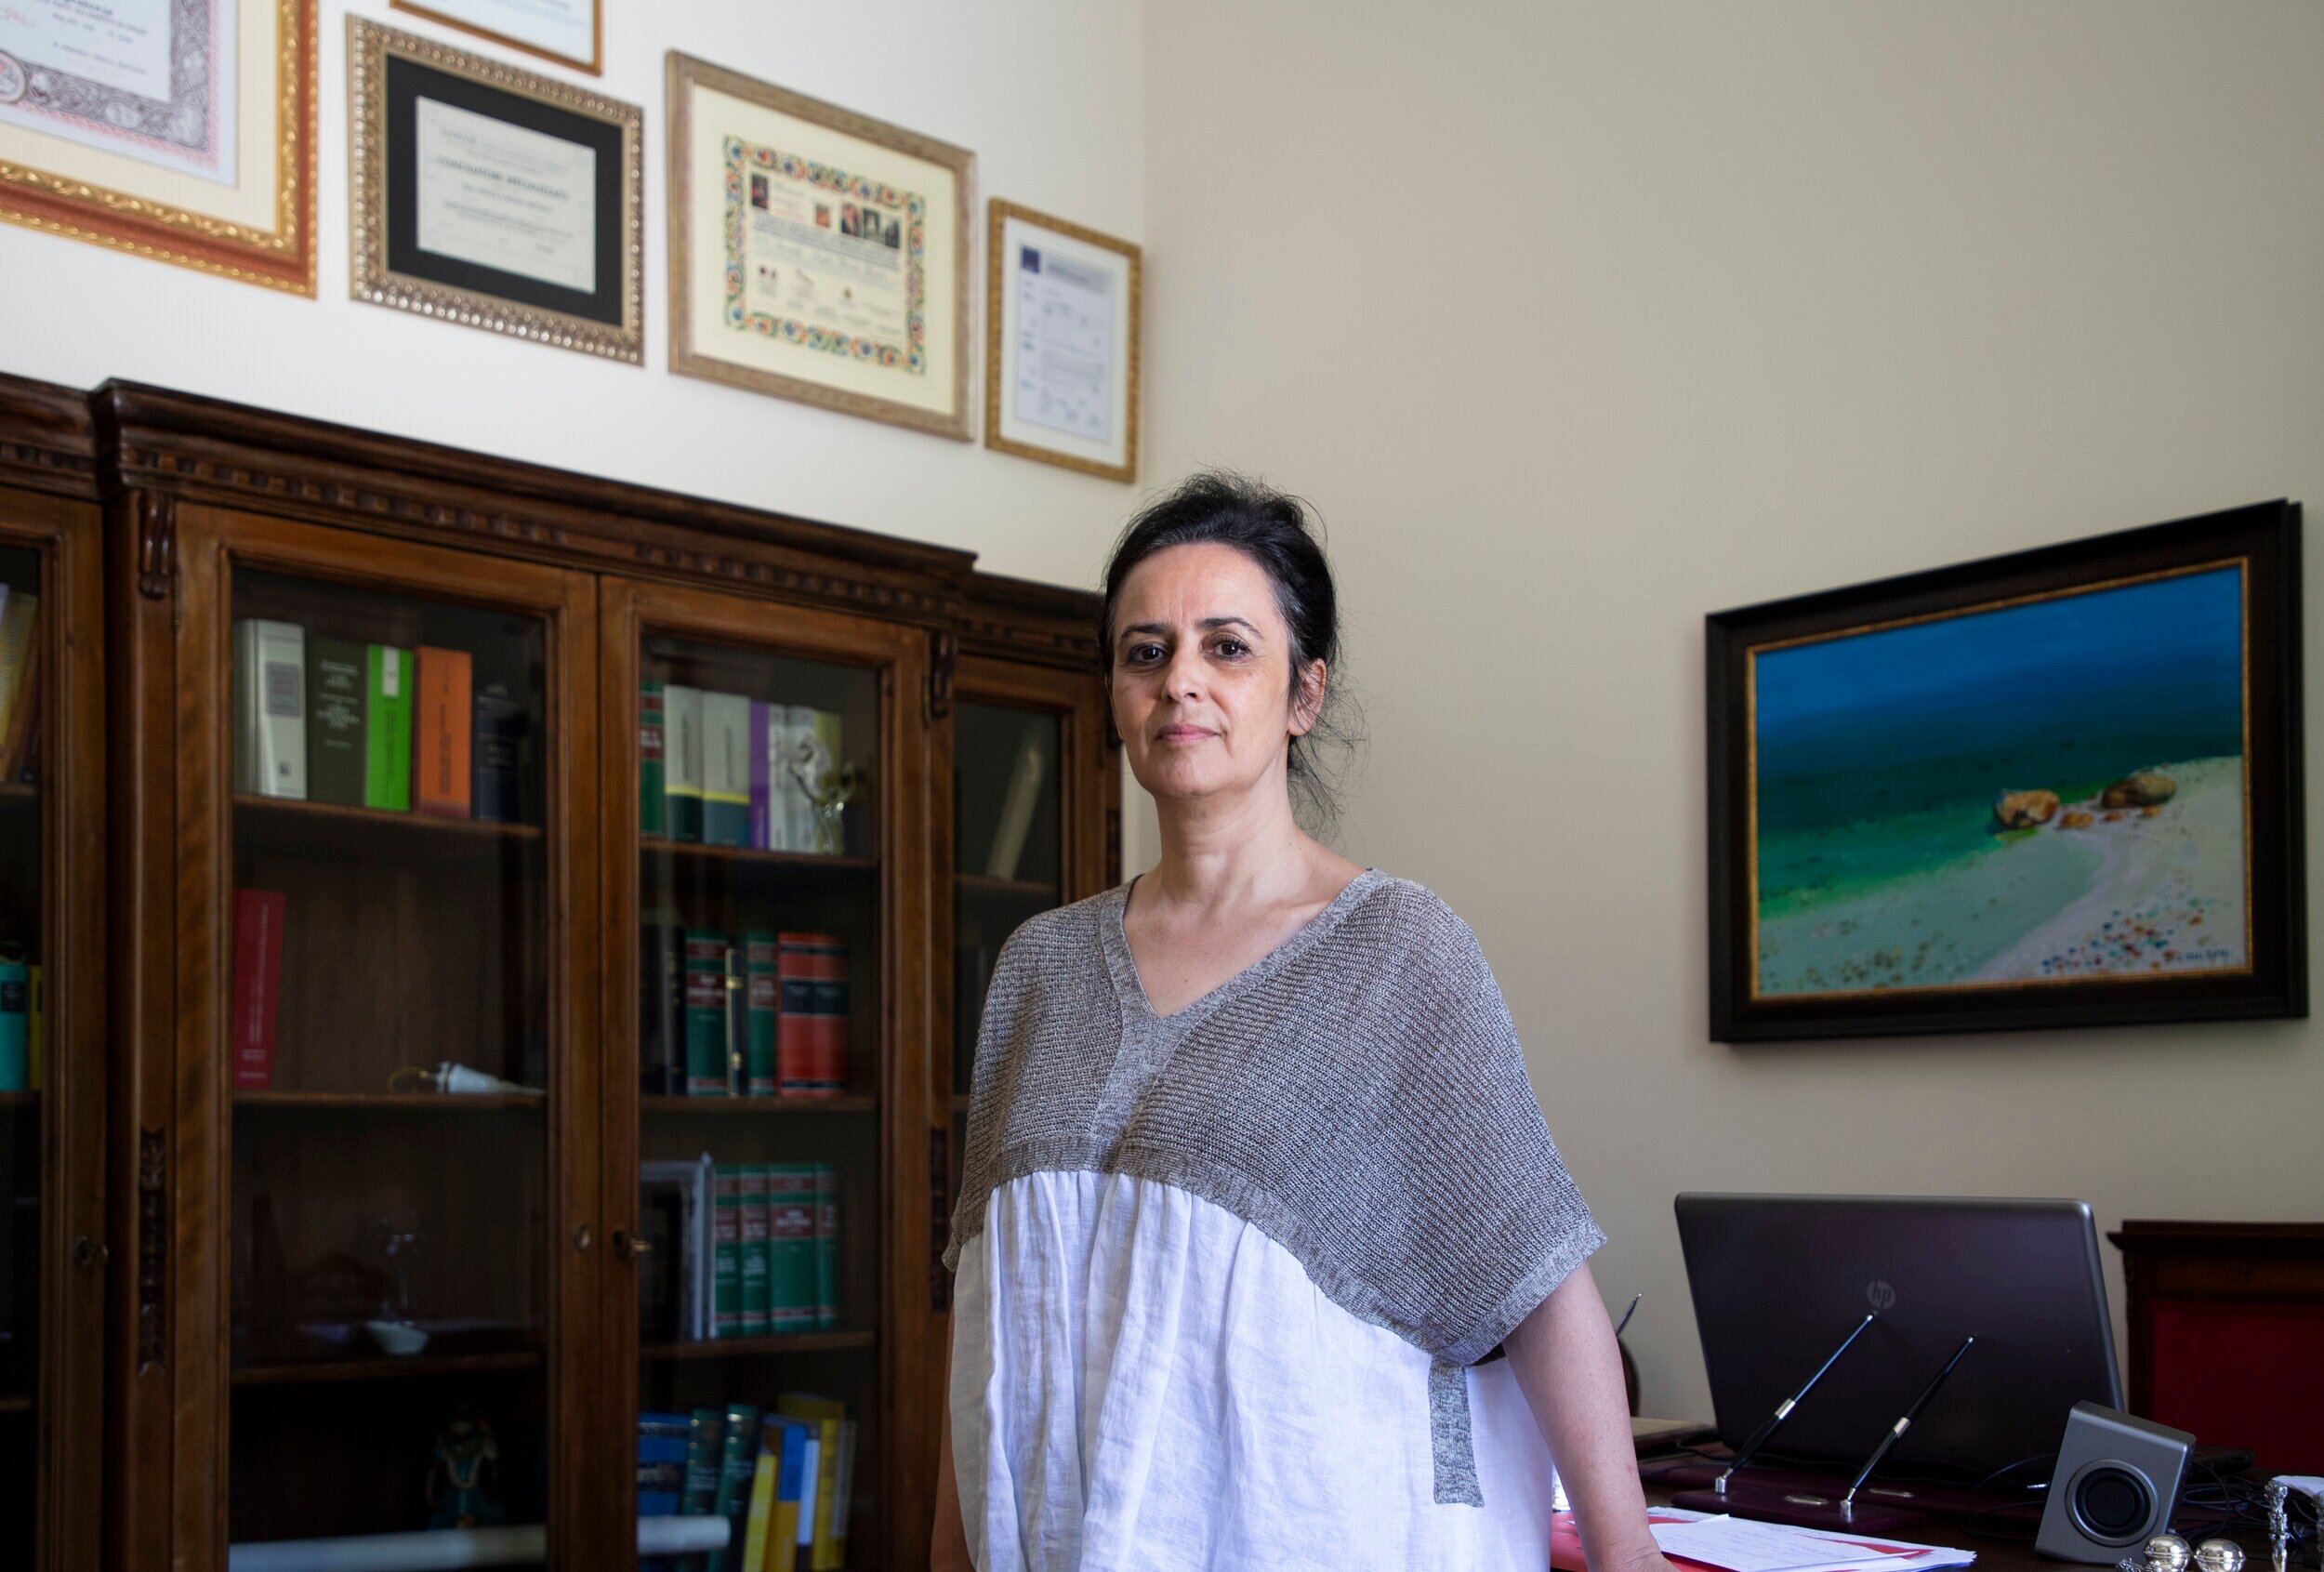  Lawyer Angela Maria Bitonti is seen in her office in Matera on July 8. 2020. Bitonti has been among the first to denounce malpractices, blackmailing and frauds linked to the current regularization procedure in Italy.  